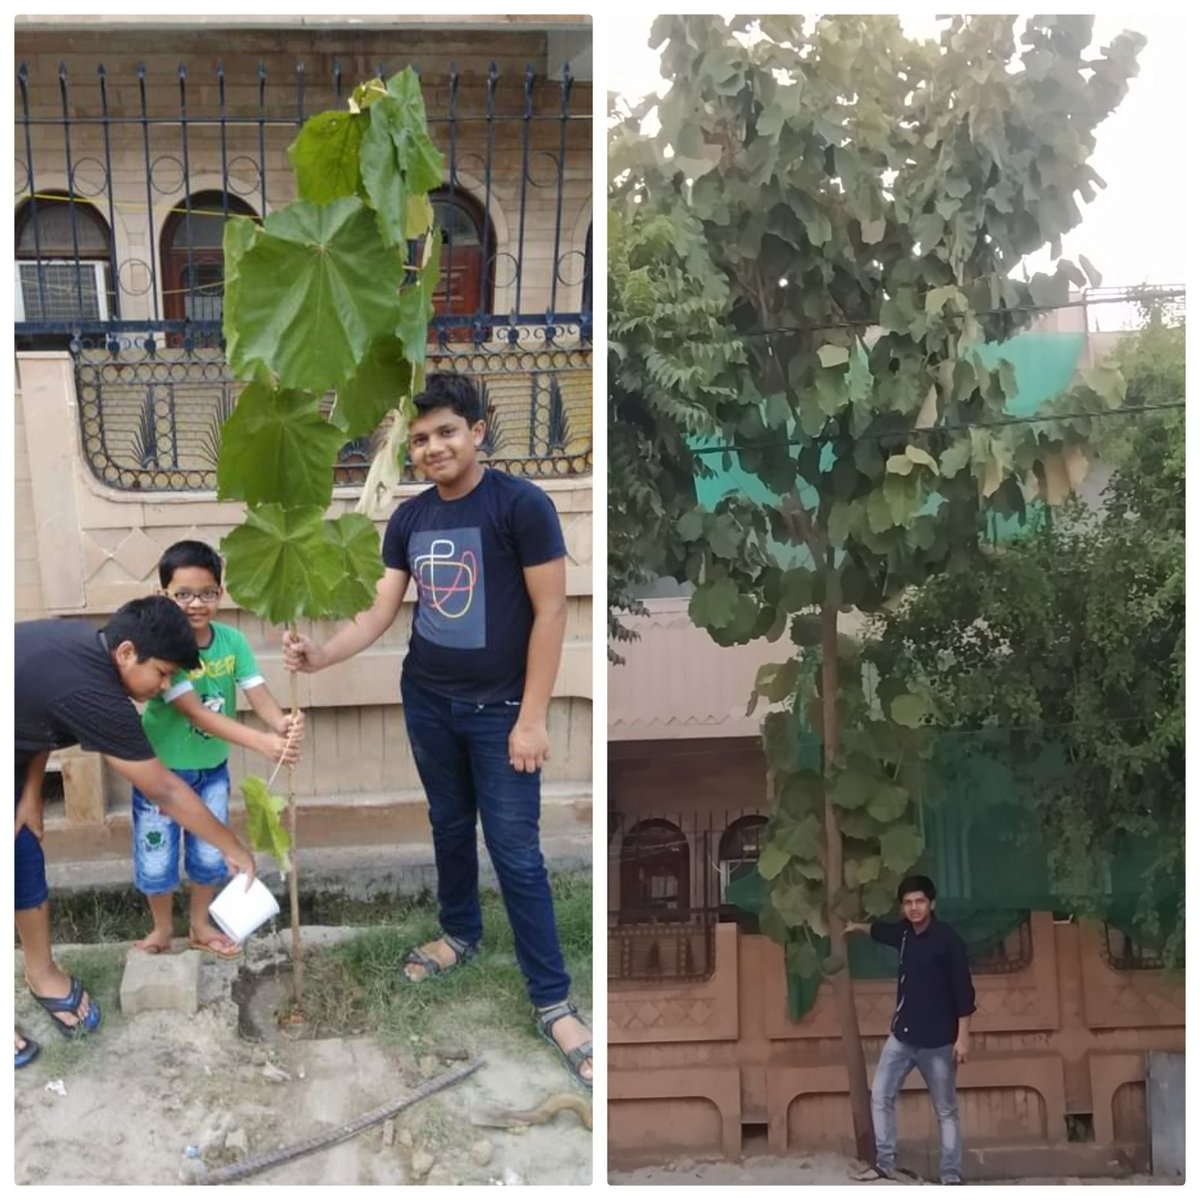 THEN and NOW ..By lord Shri Krishna's grace..Kanak champa sapling no.(1672) planted on 7/6/19  #onetreeeverydaysaveearthcampaign #fightclimatechange #afforestation #carbonsequestration #BeatAirPollution #PlantTreesPlantHope #ClimateAction #oneearth #KingdomAnimaliaTrust